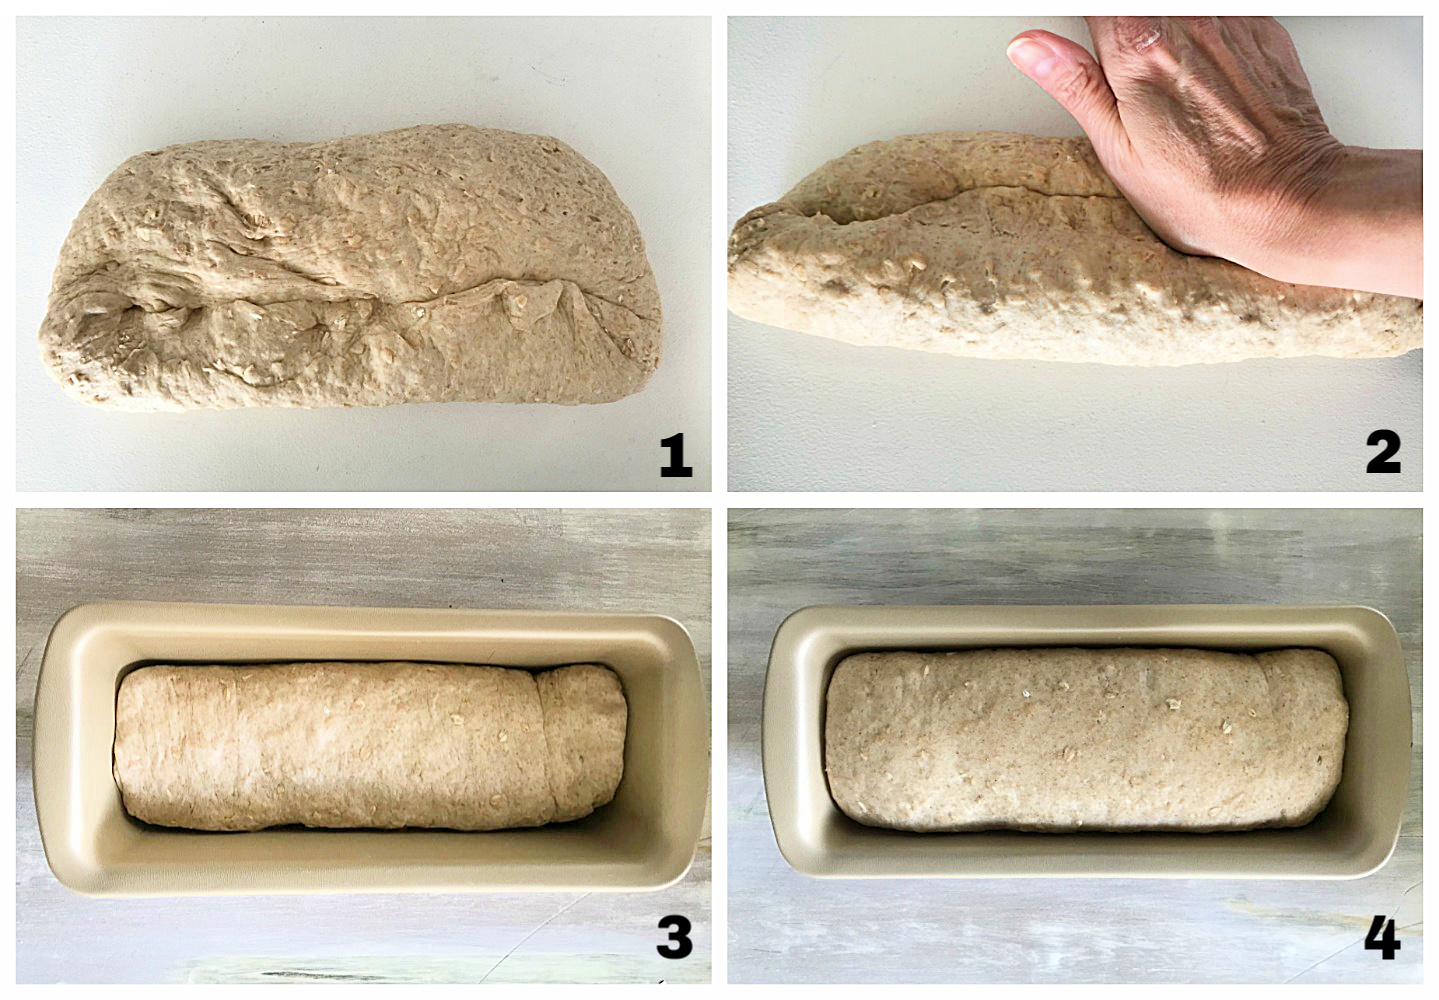 Image collage of bread process for making a loaf 